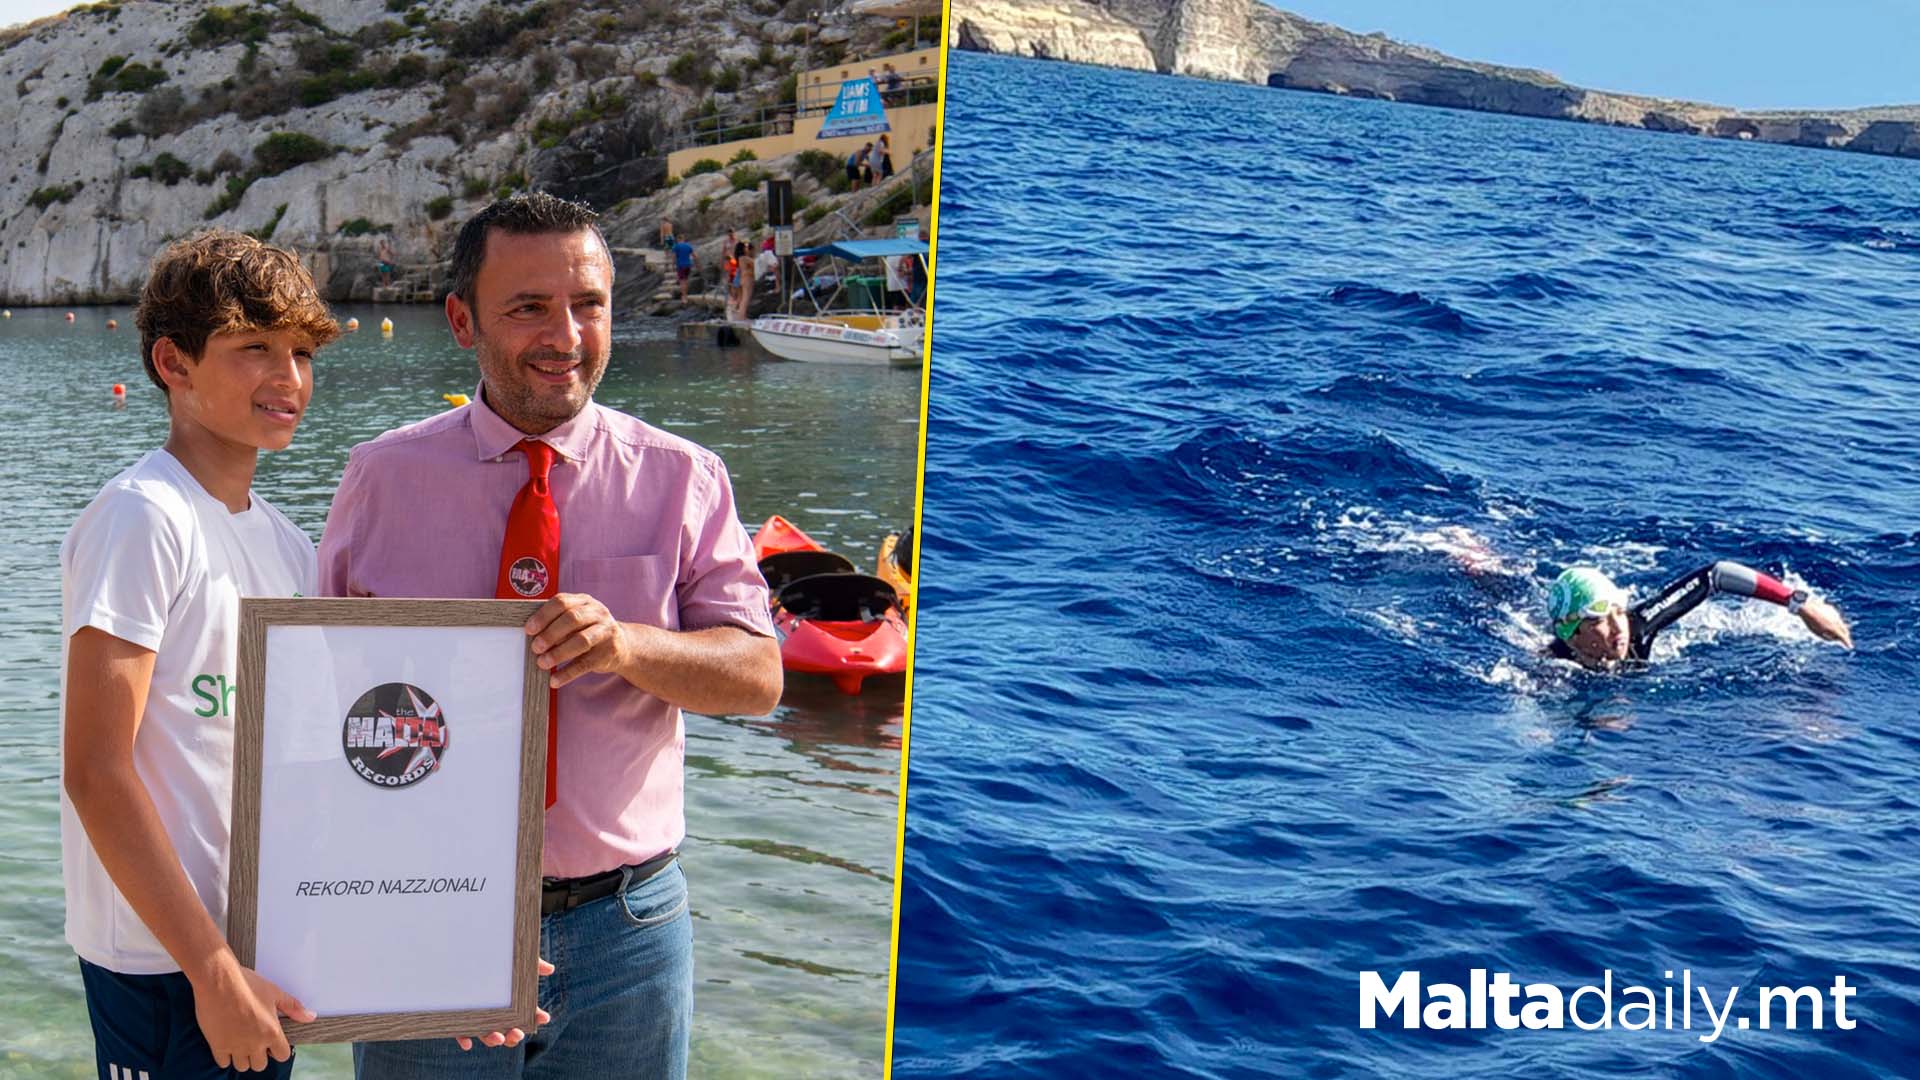 Youngest Maltese To Swim From Malta To Gozo Breaks Record